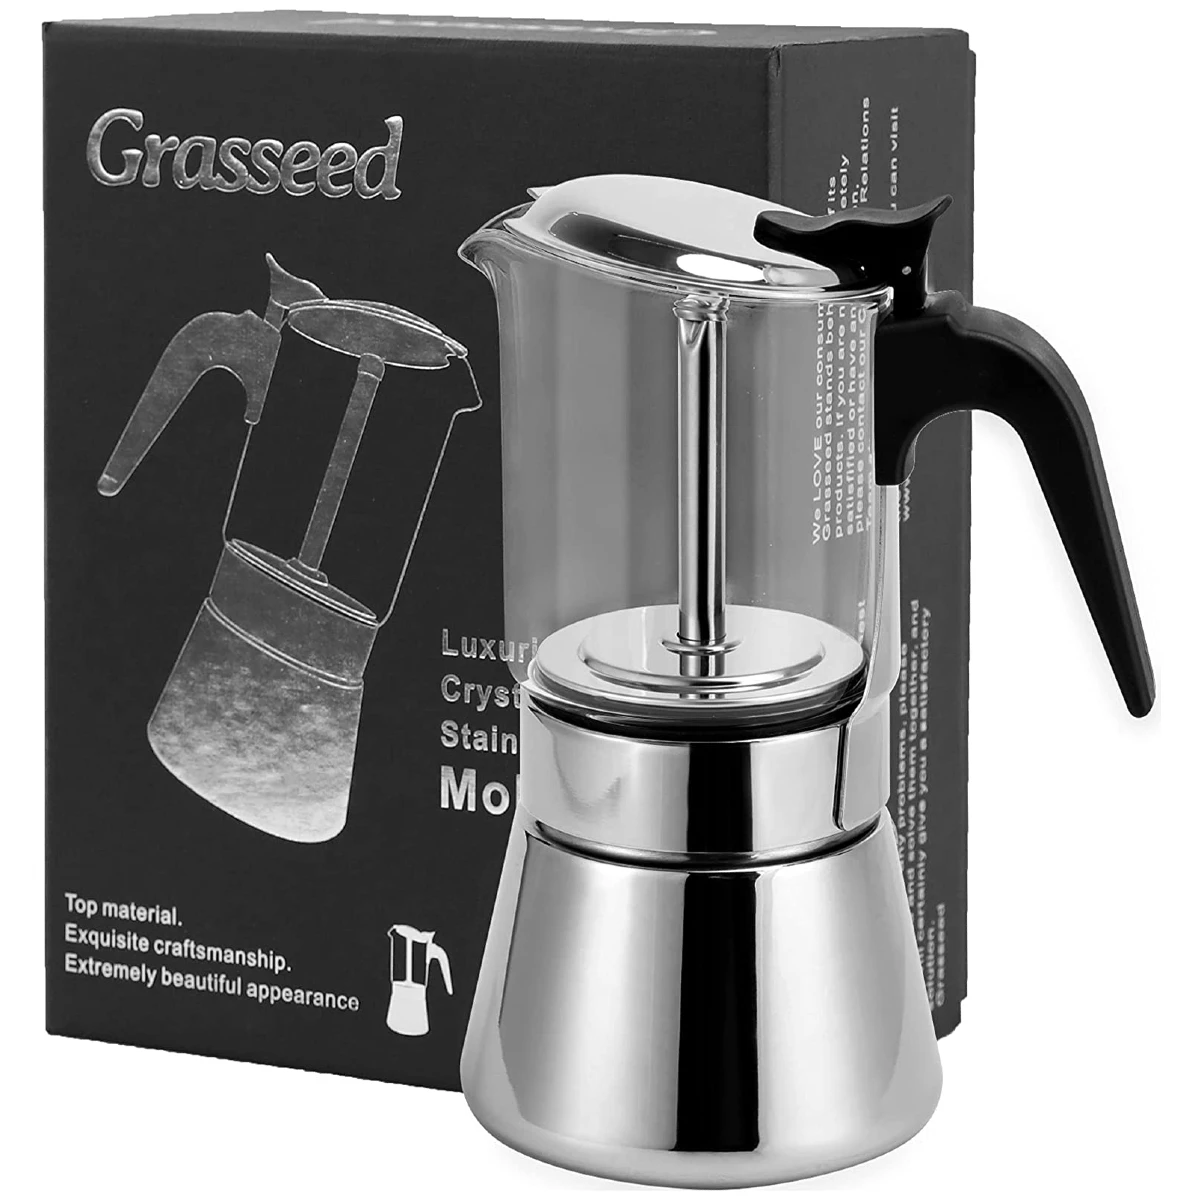 Moka Pot Food Grade Glass and Stainless Steel Portable 160 ml (4 cups)